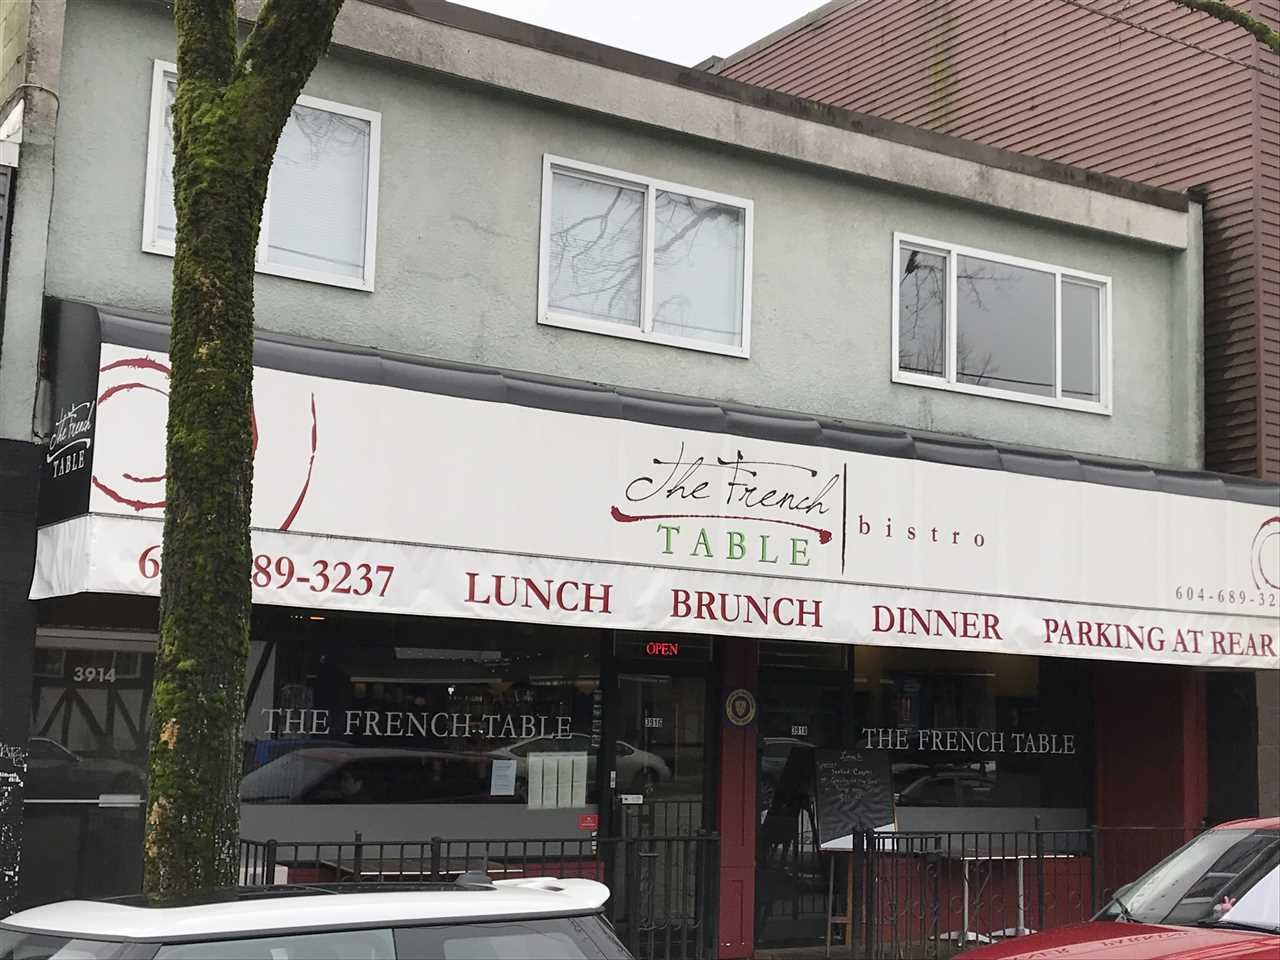 Main Photo: 3914-3916 MAIN STREET in : Main Commercial for sale (Vancouver East)  : MLS®# C8017489